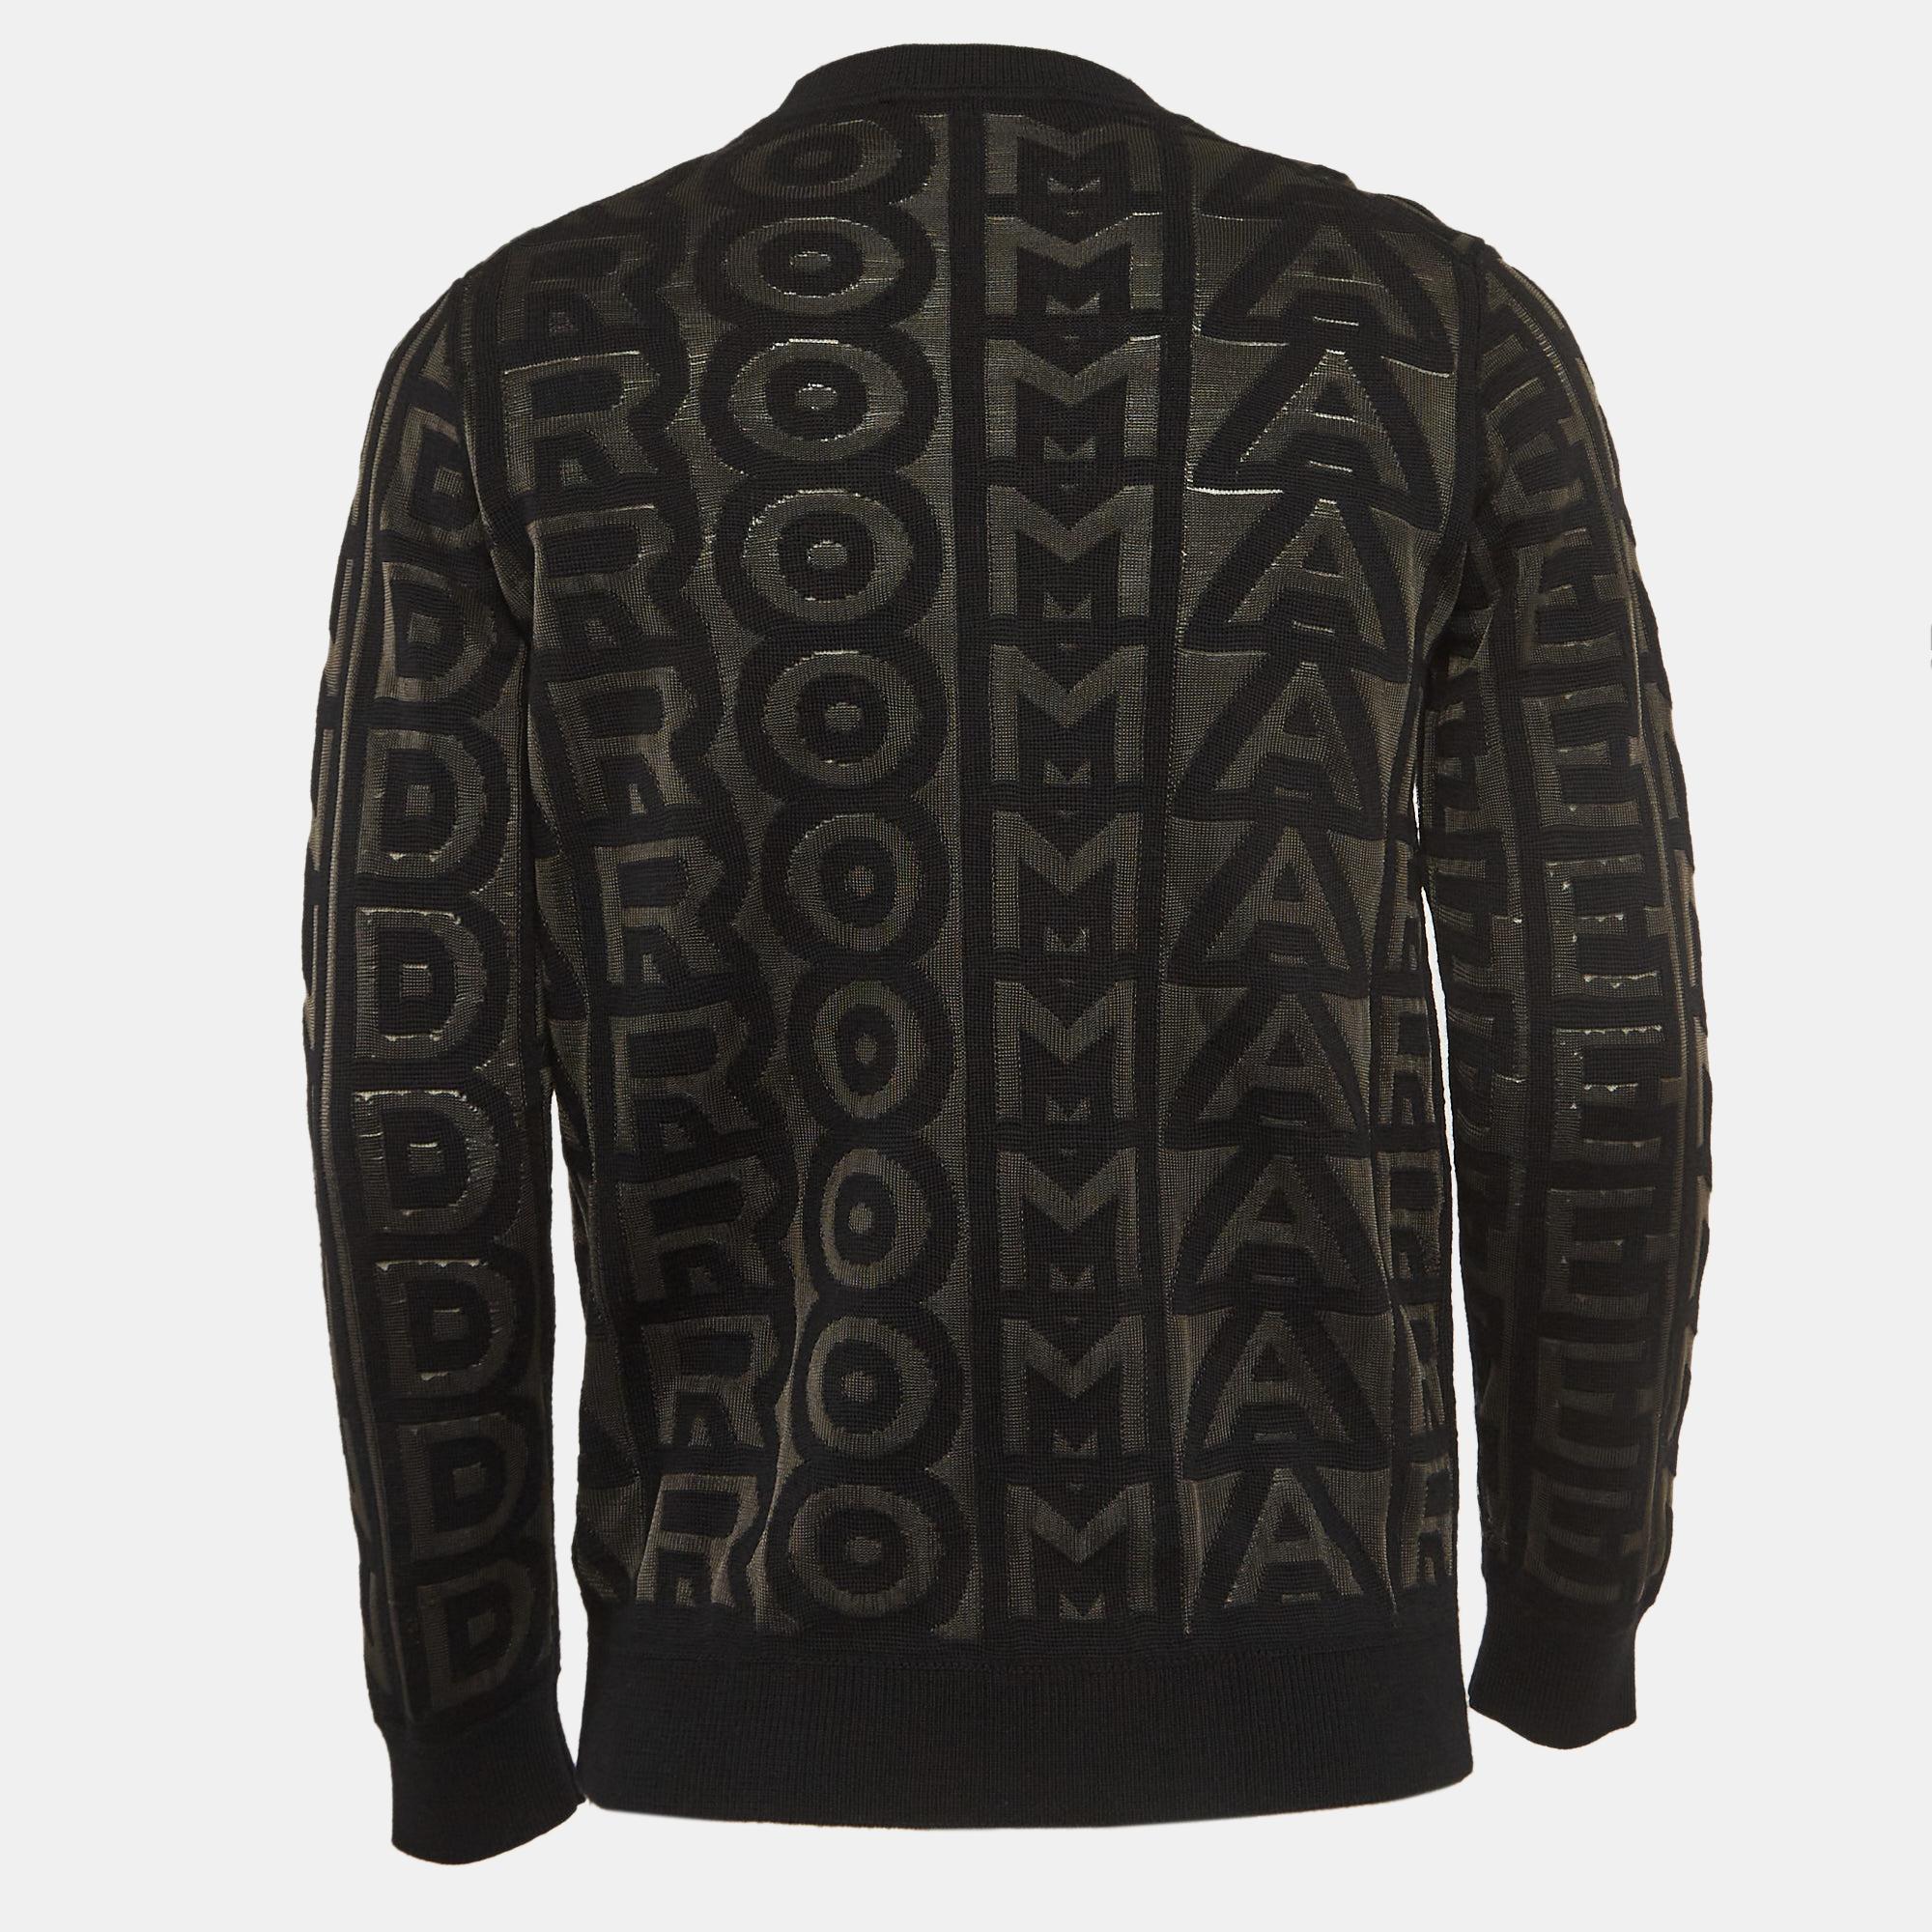 Crafted with precision and style, the Fendi X Marc Jacobs sweatshirt embodies effortless chic. Its intricate intarsia knit design seamlessly blends Fendi logo with the artistry of Marc Jacobs, creating a statement piece. The crew neck offers